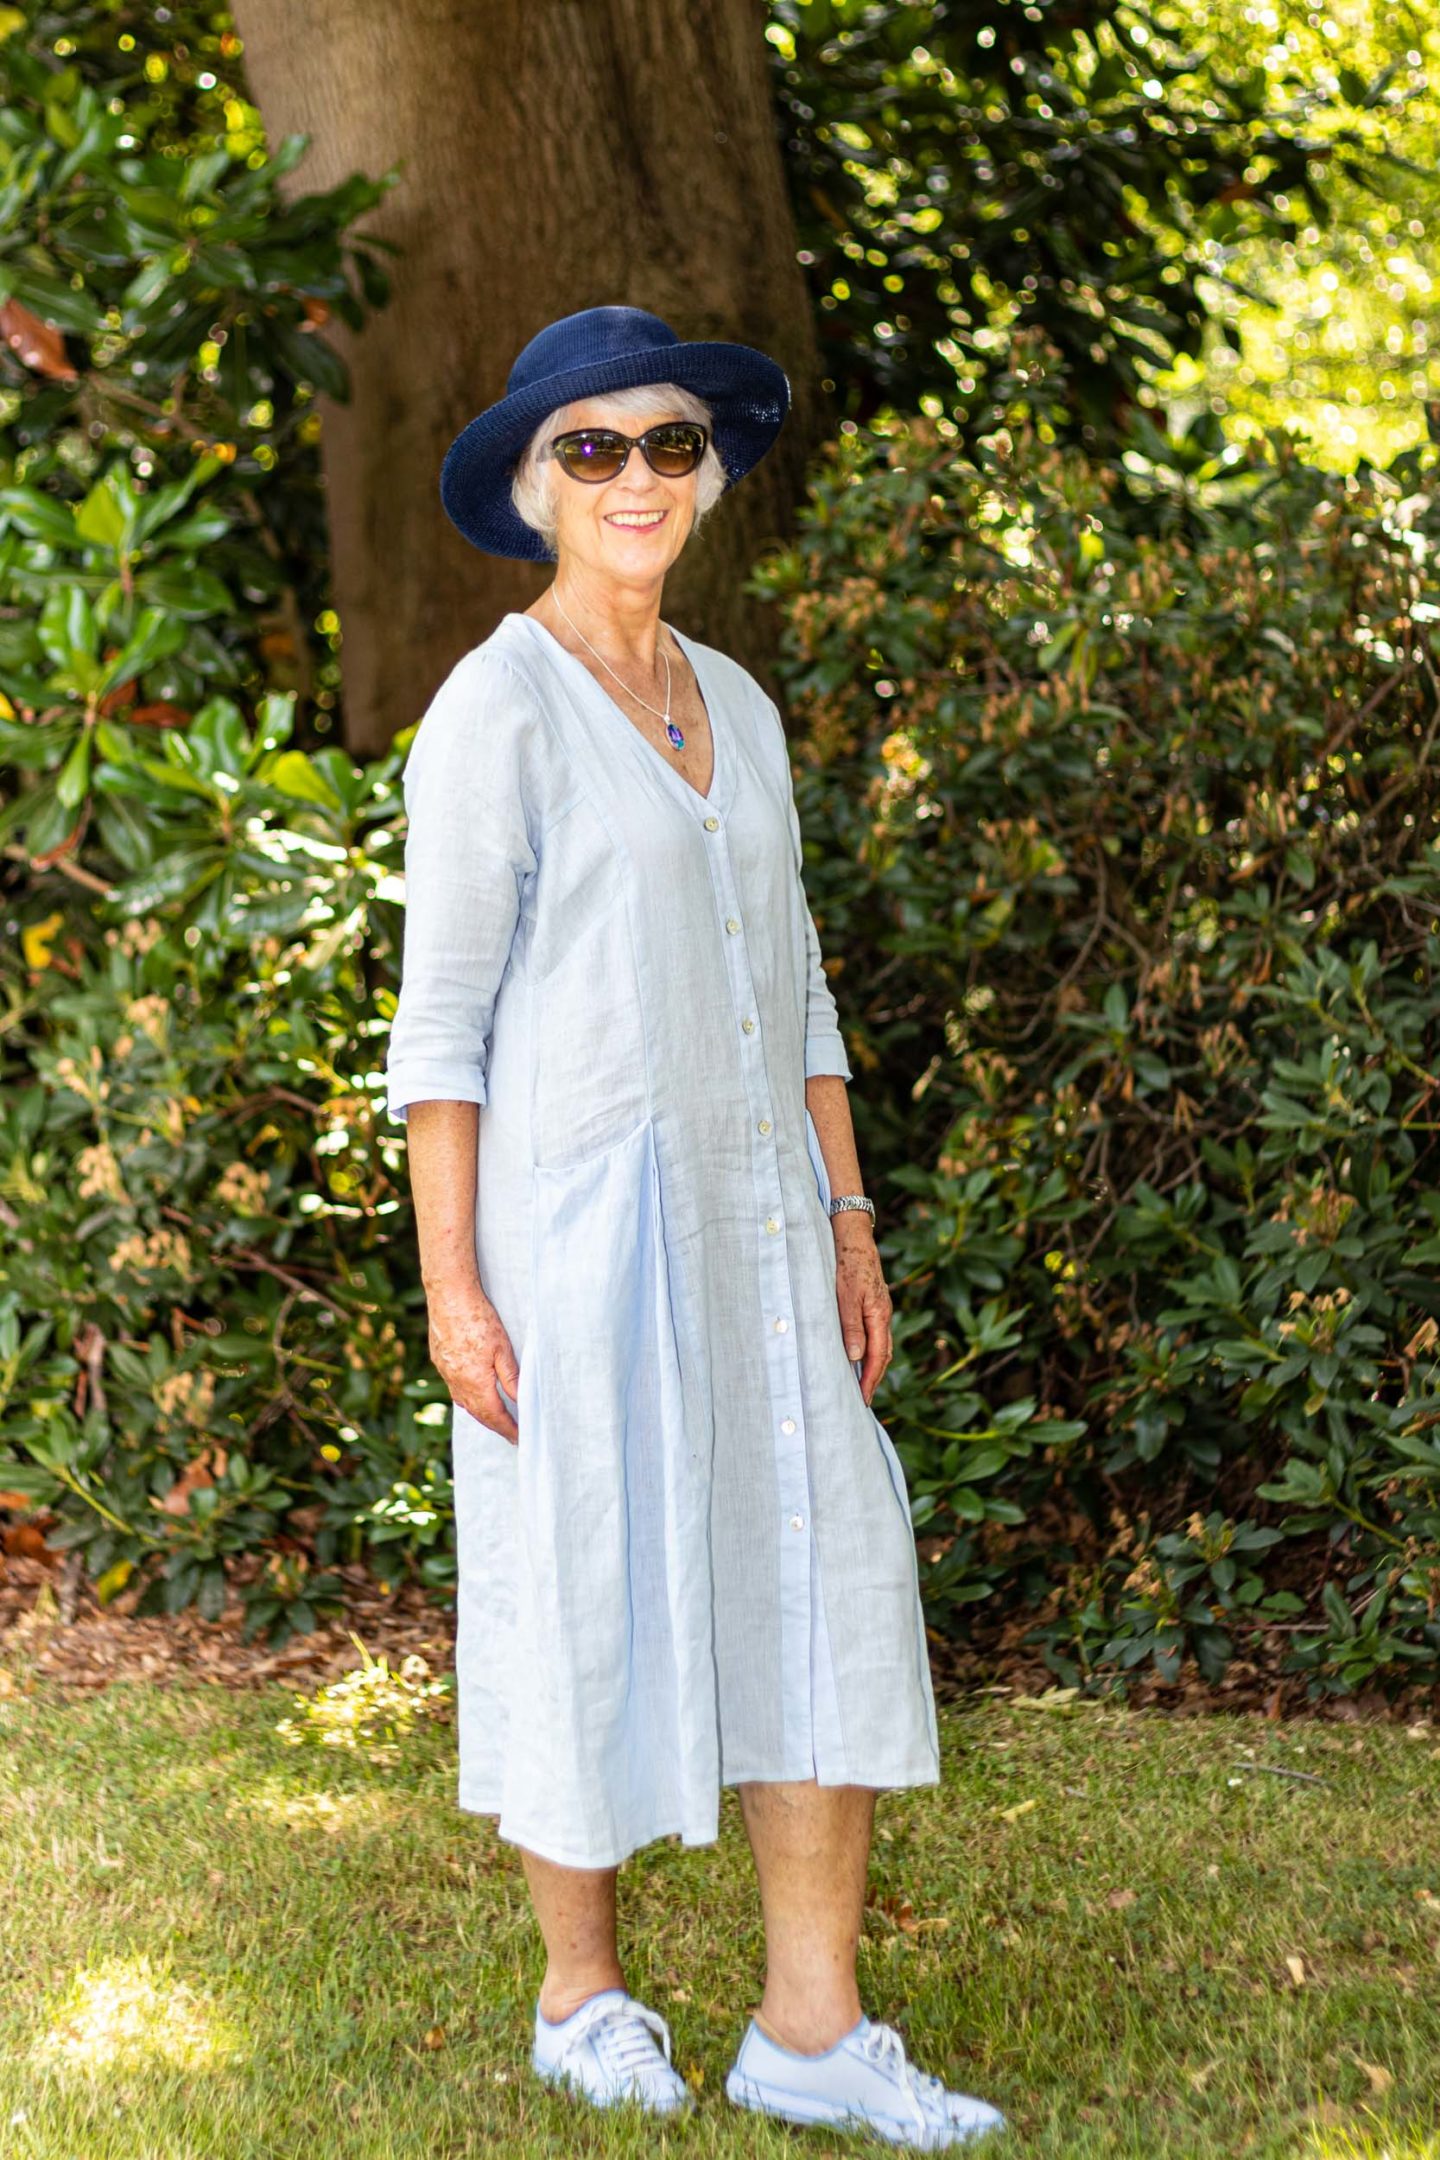 A cool linen dress is ideal for hot weather - Chic at any age